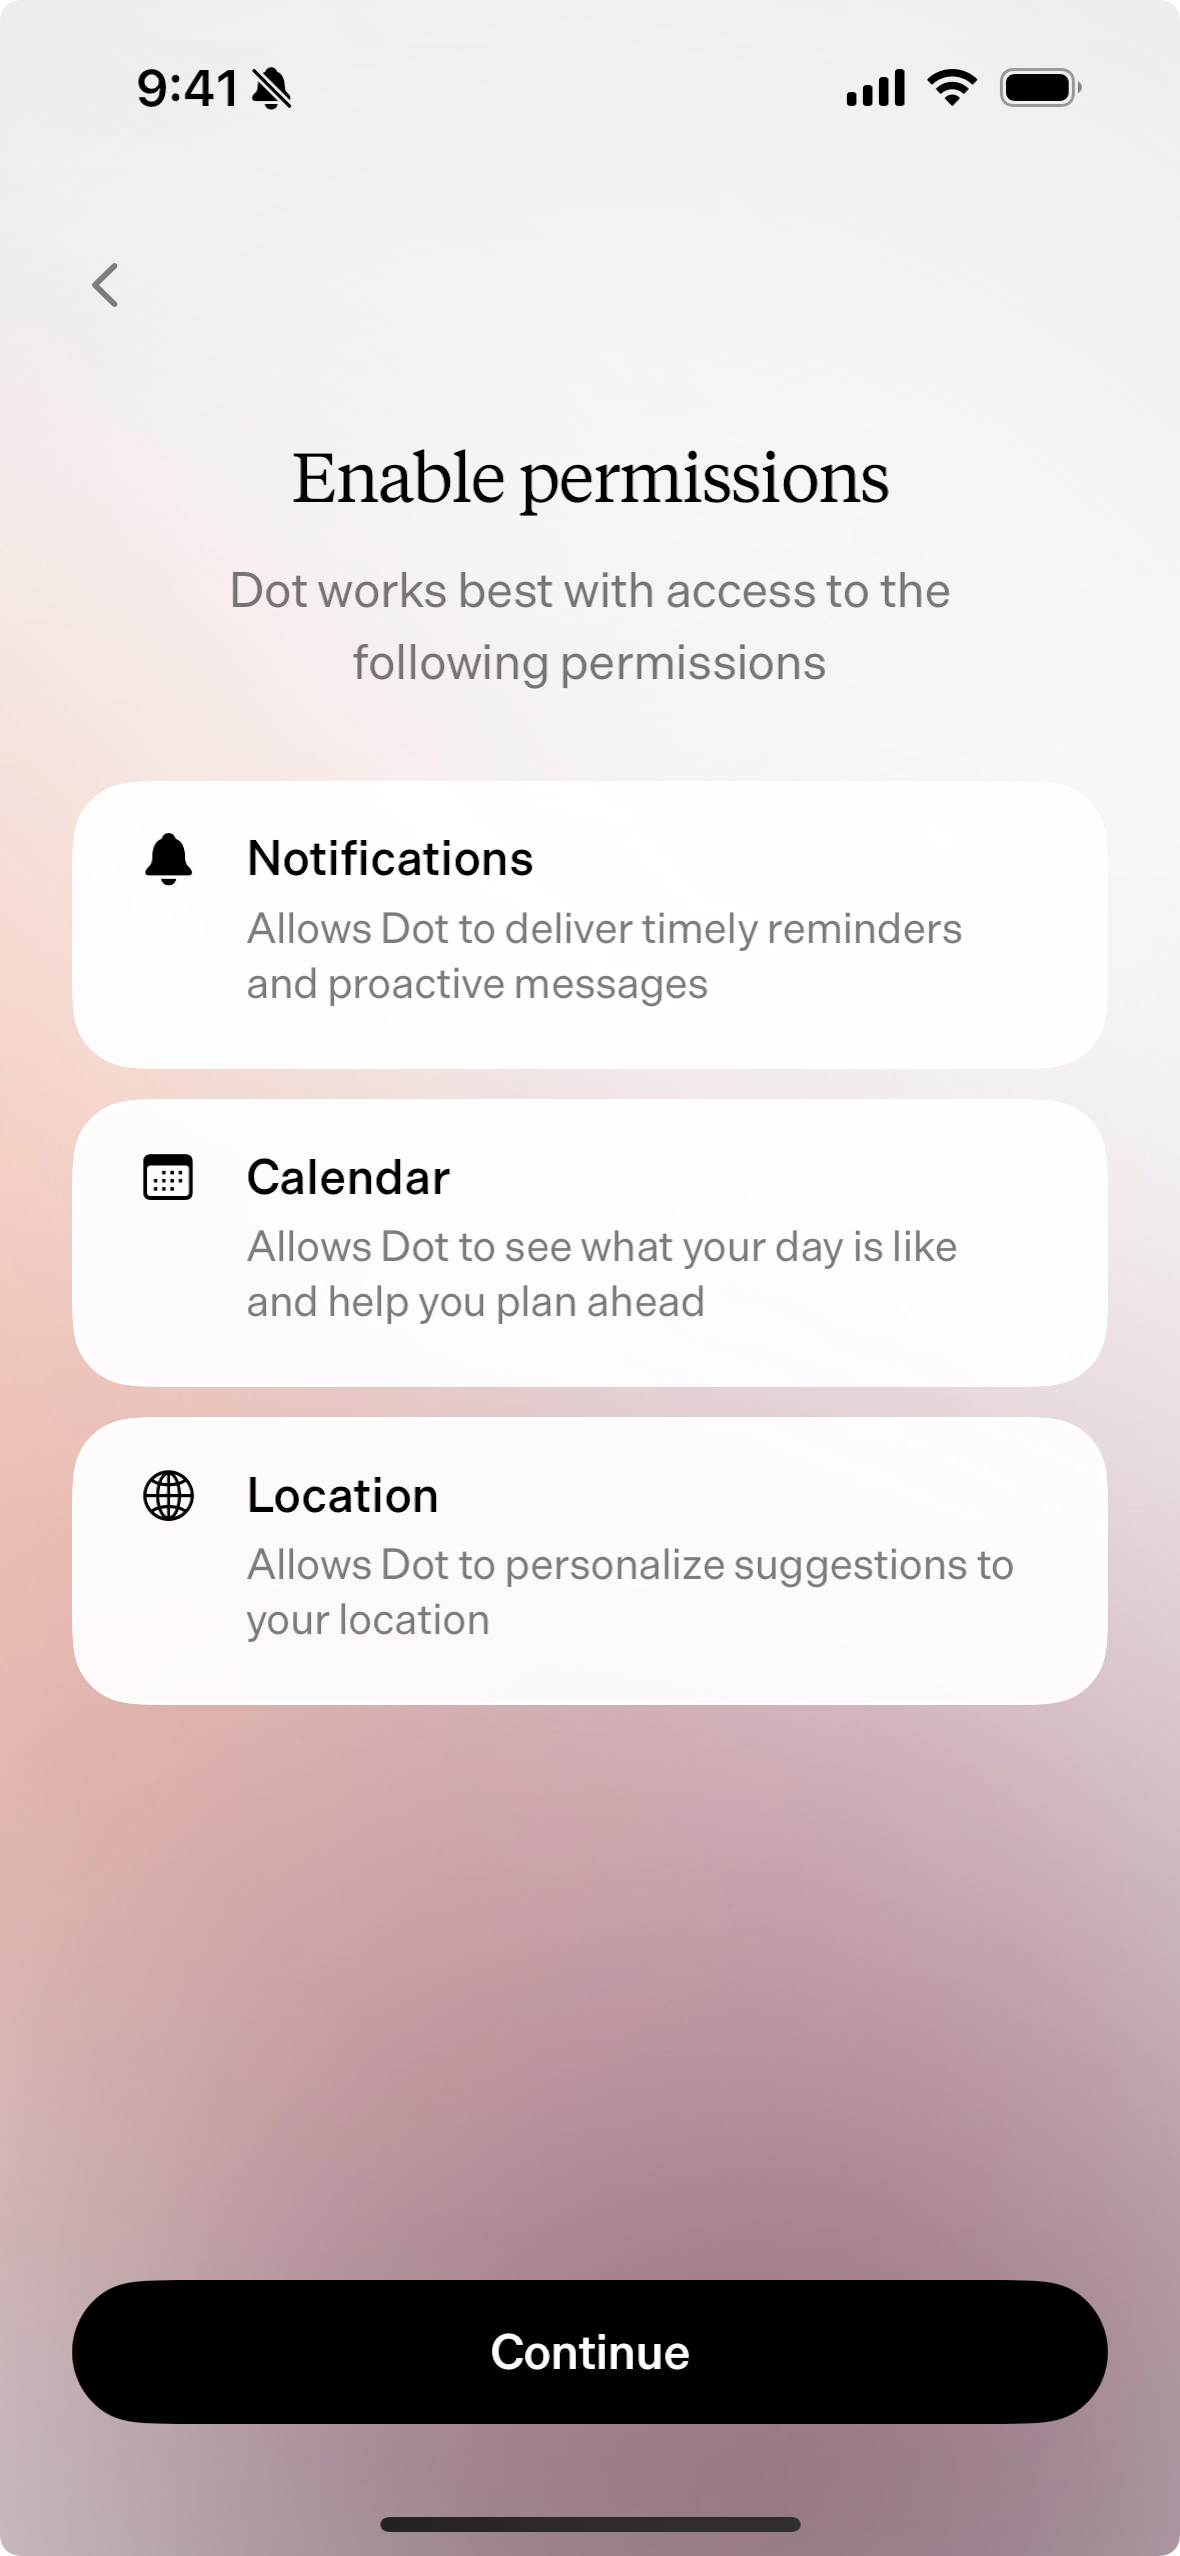 Enable permissions to notifications, calendar, and location